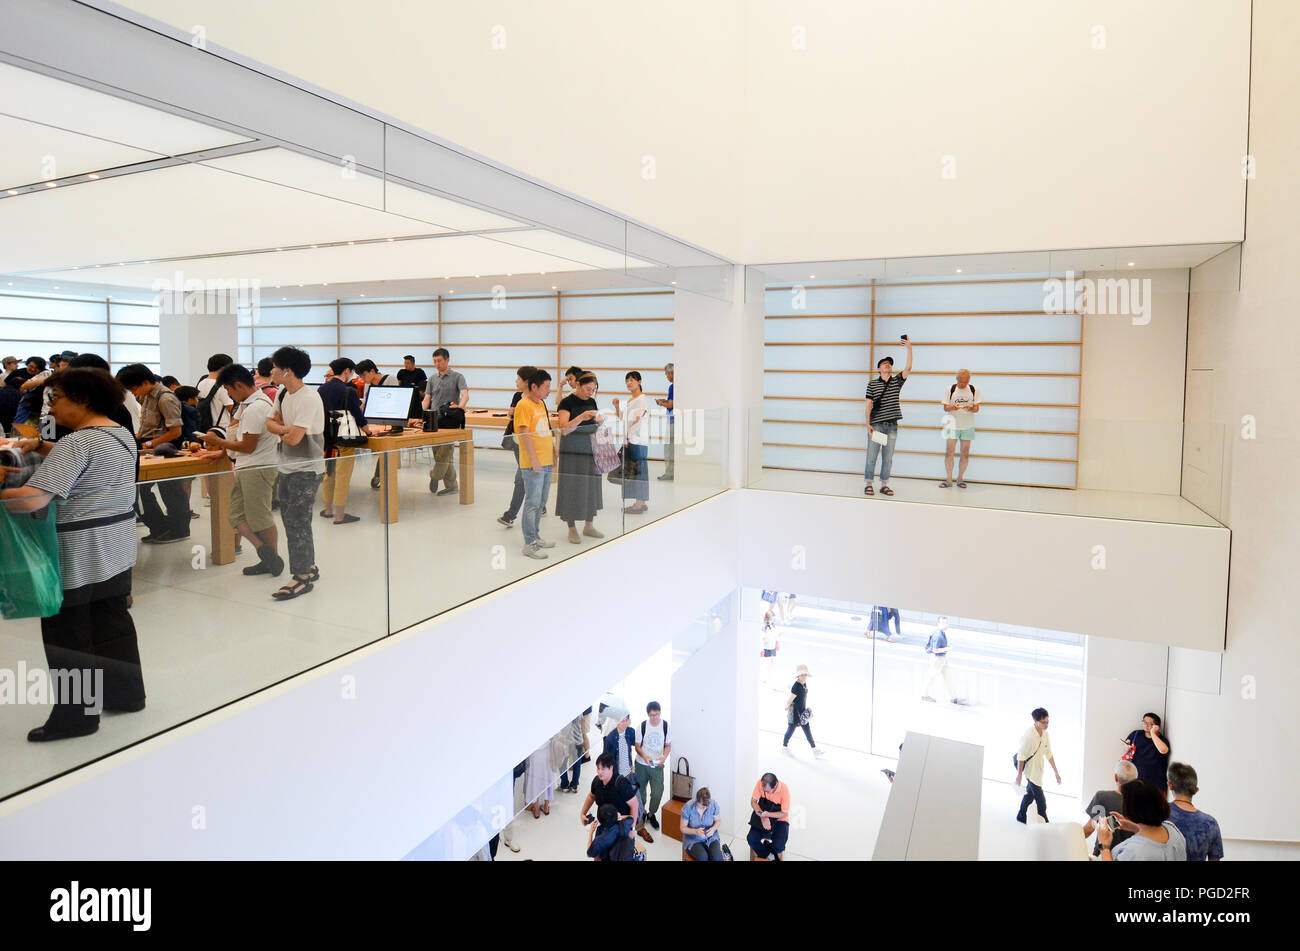 Locals And Tourists Explore The Kyoto Apple Store On The